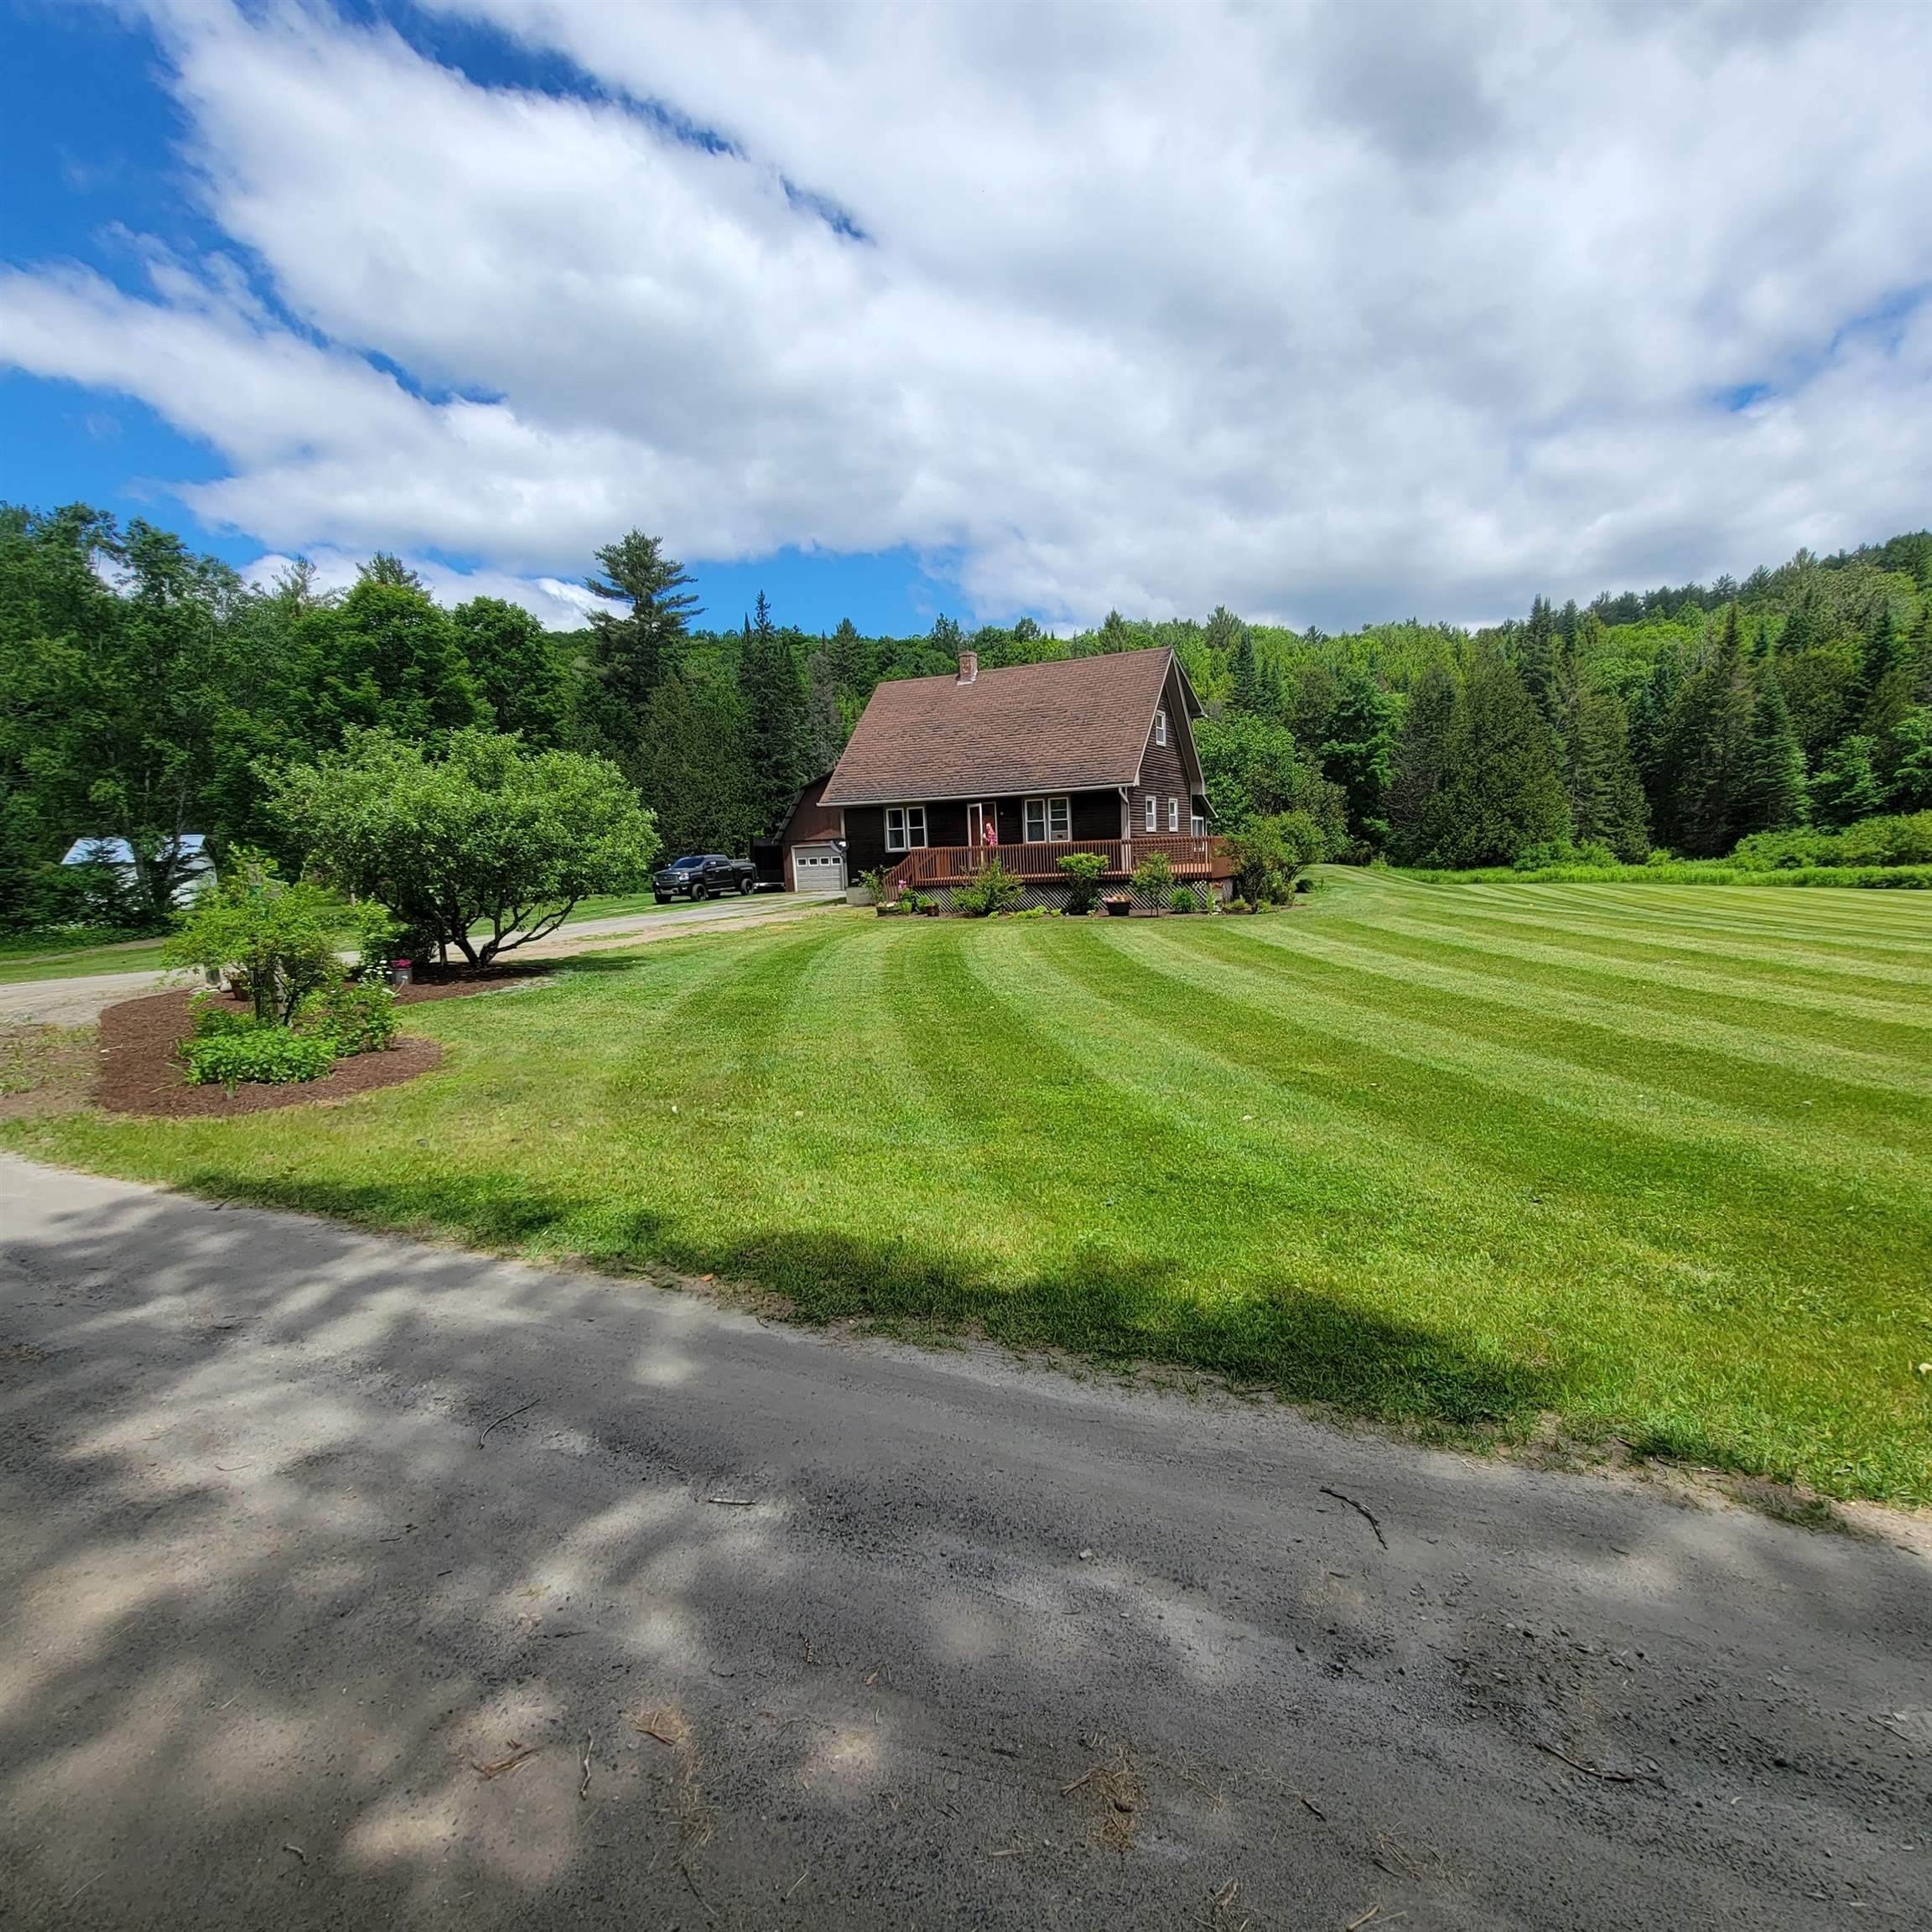 Single Family Homes for Sale at Lyndon, VT 05851